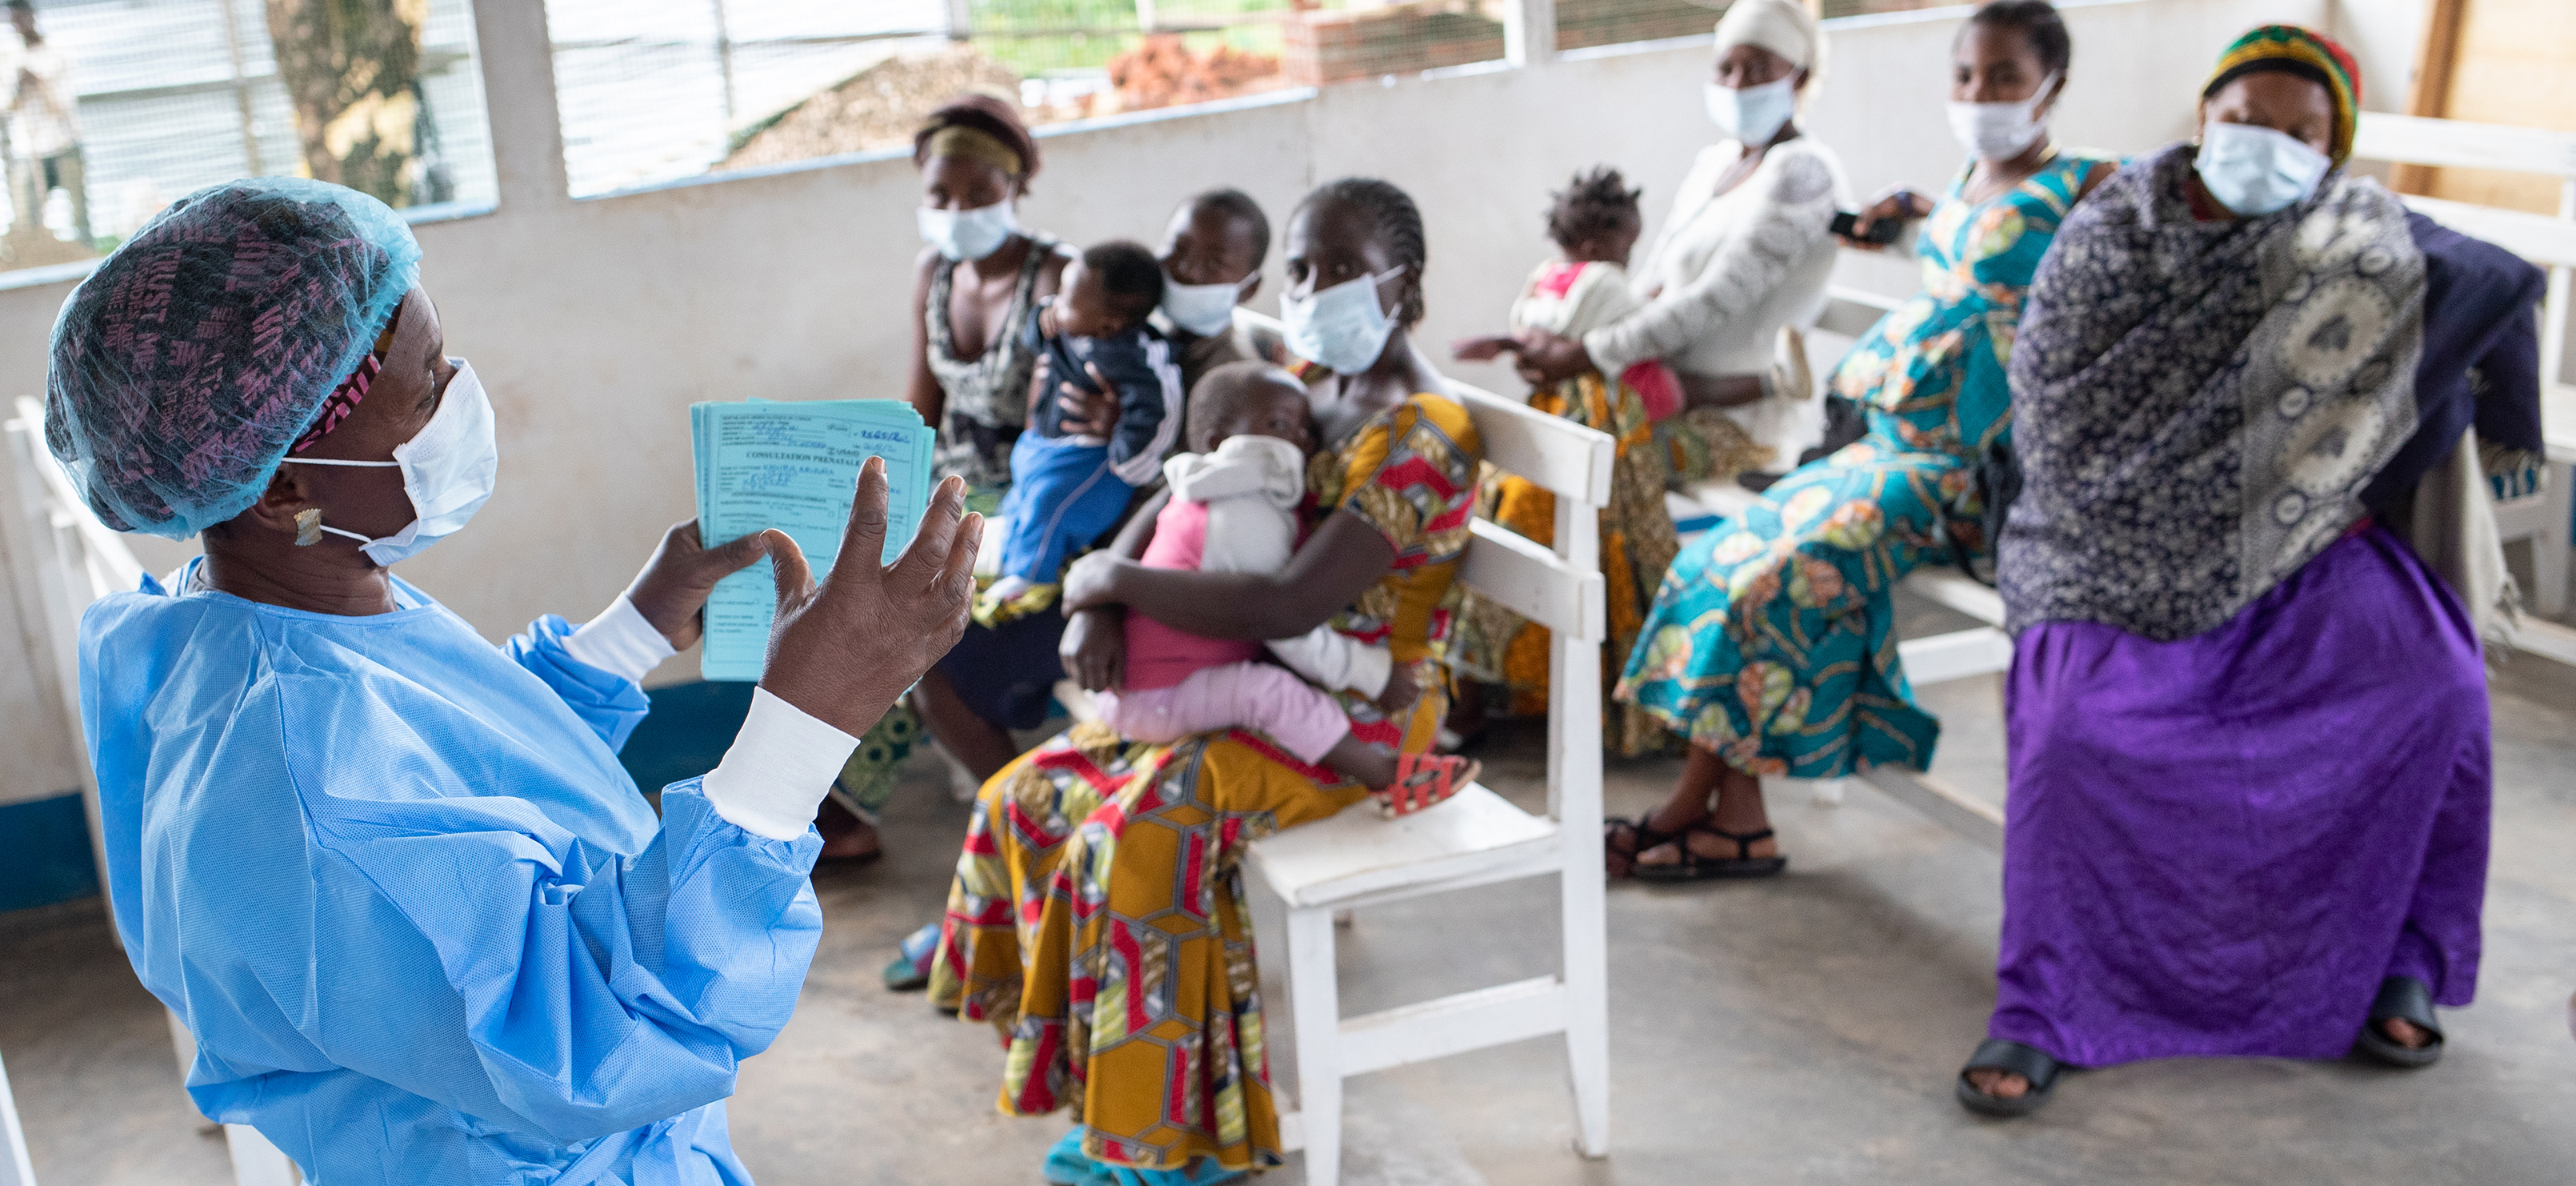 A Congolese nurse with a mask and blue scrubs presents outdoors in front of a group of seated women who are in masks and many have infants on their laps